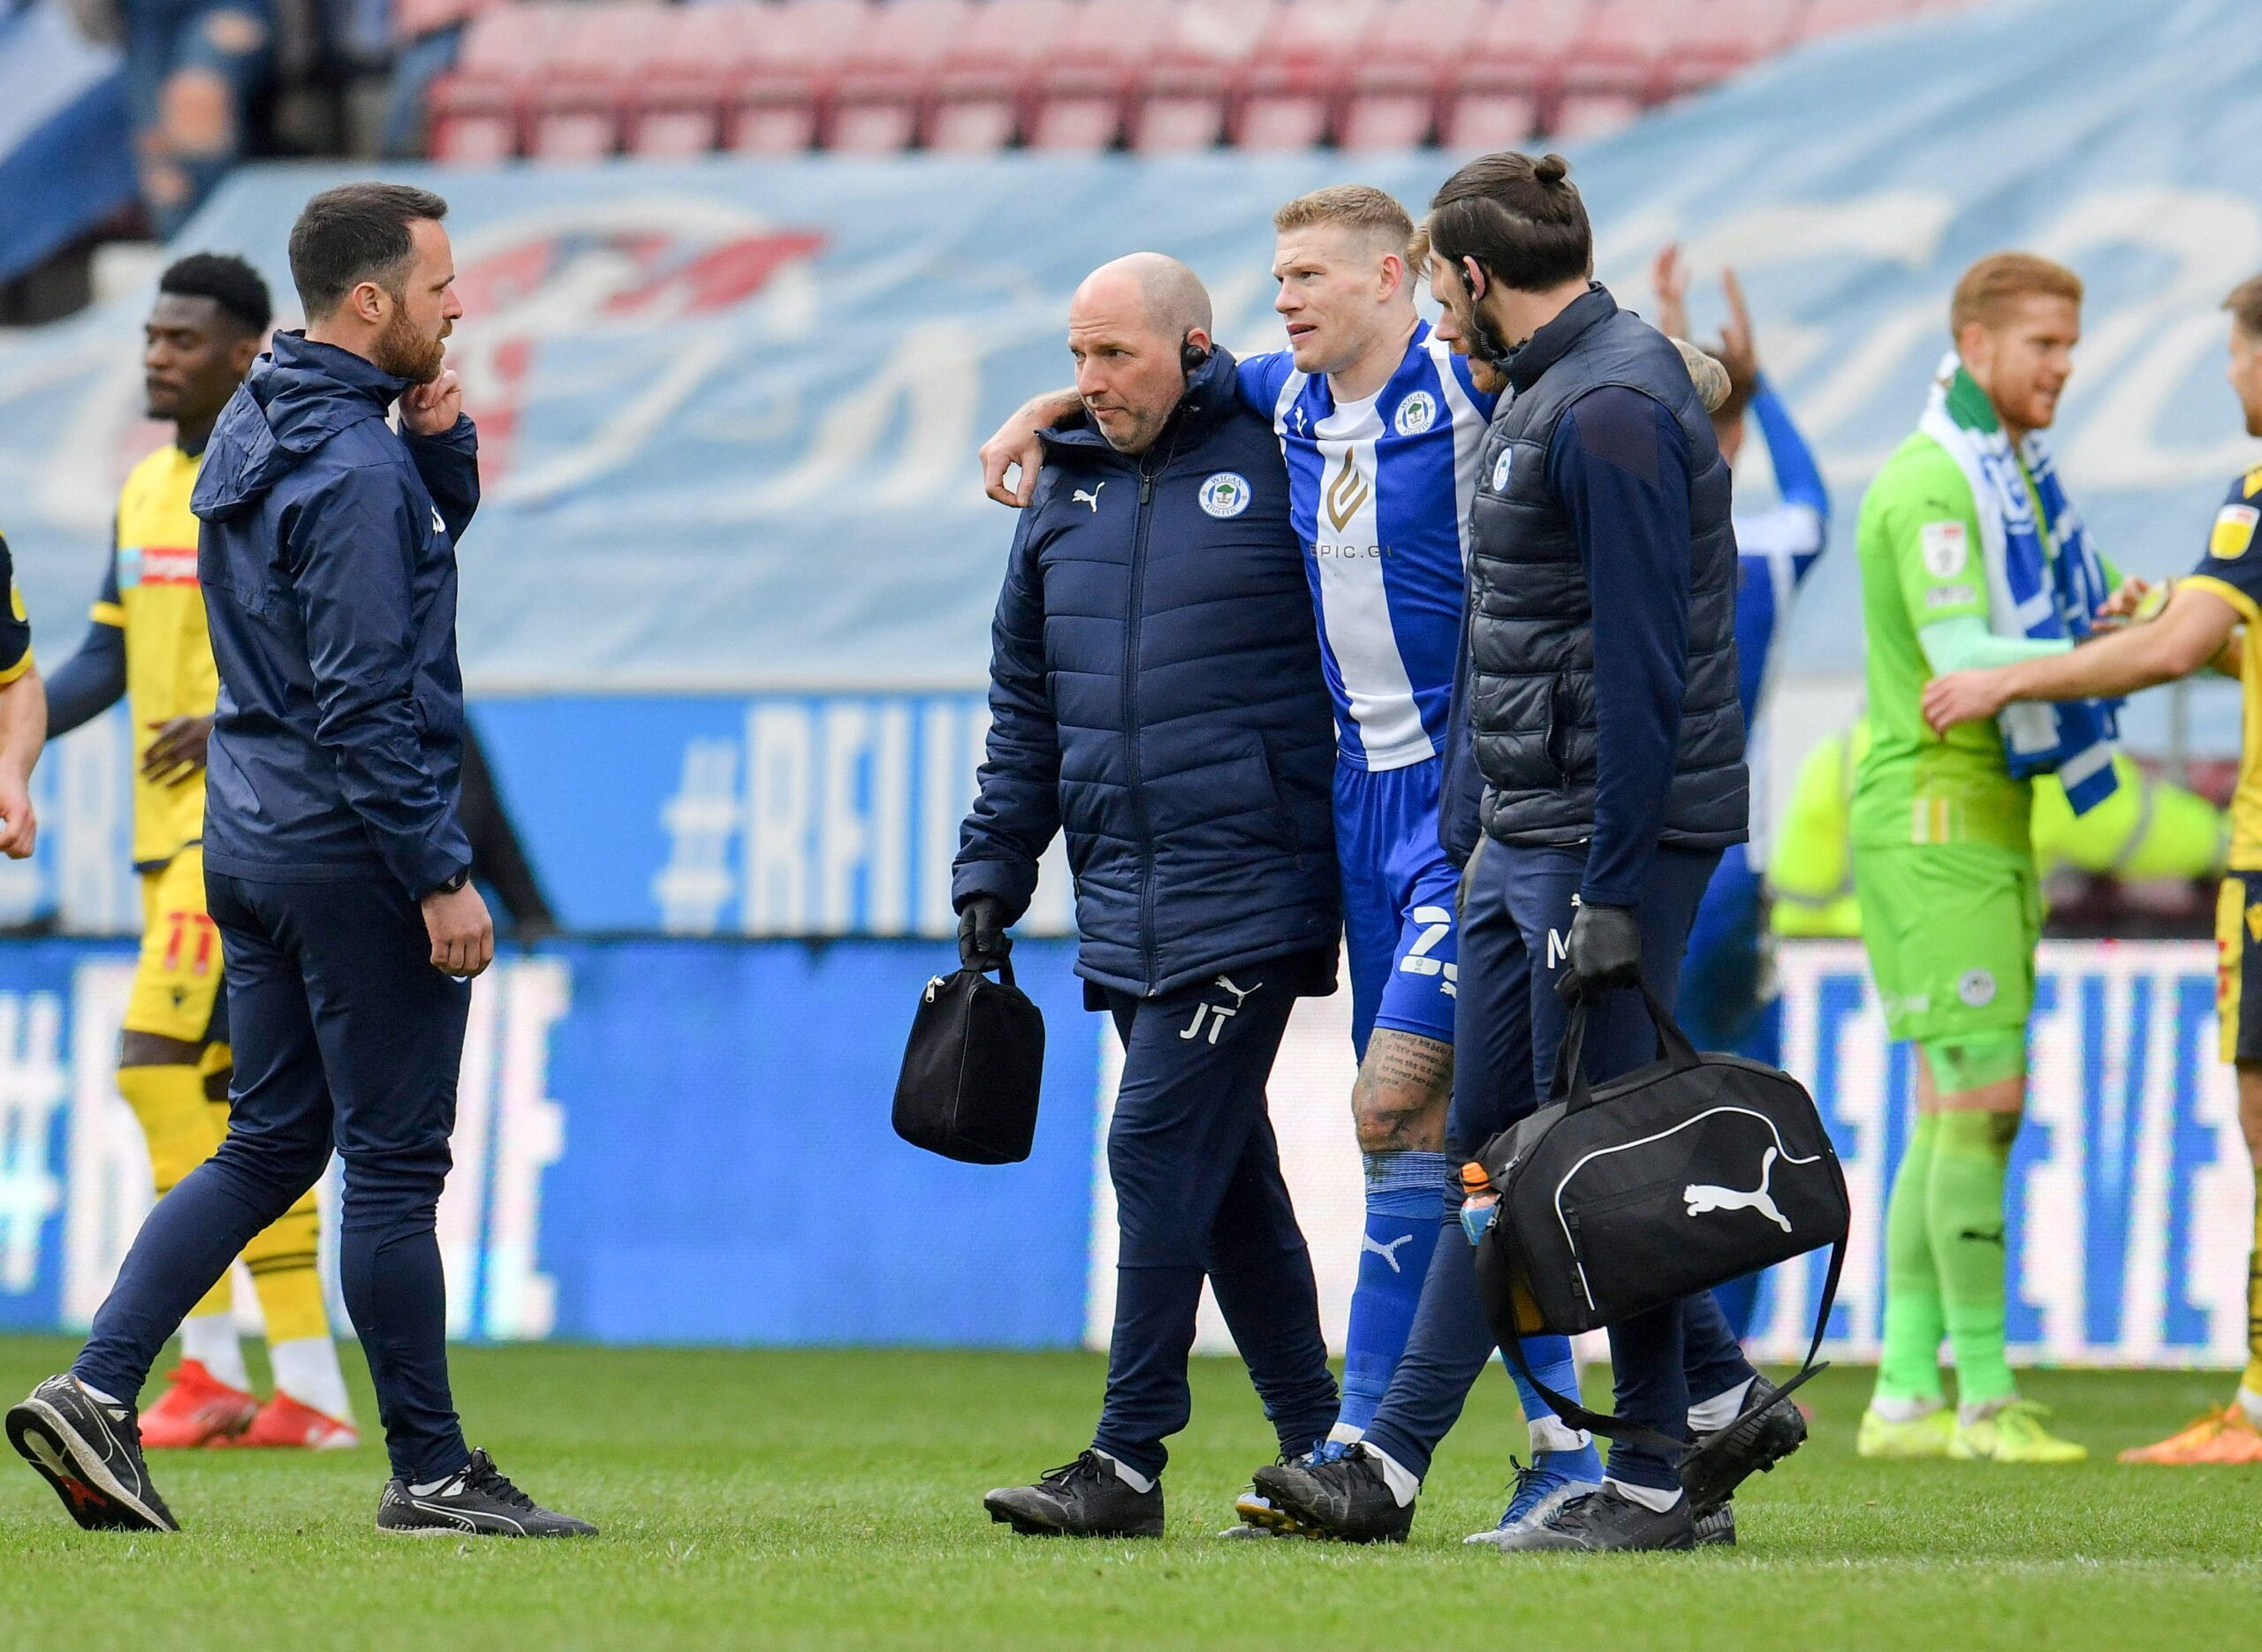 Soccer Football - League One - Wigan Athletic v Bolton Wanderers - DW Stadium, Wigan, Britain - April 2, 2022 gan Athletic's James McClean is helped off the pitch at full time  Action Images/Paul Burrows  EDITORIAL USE ONLY. No use with unauthorized audio, video, data, fixture lists, club/league logos or 